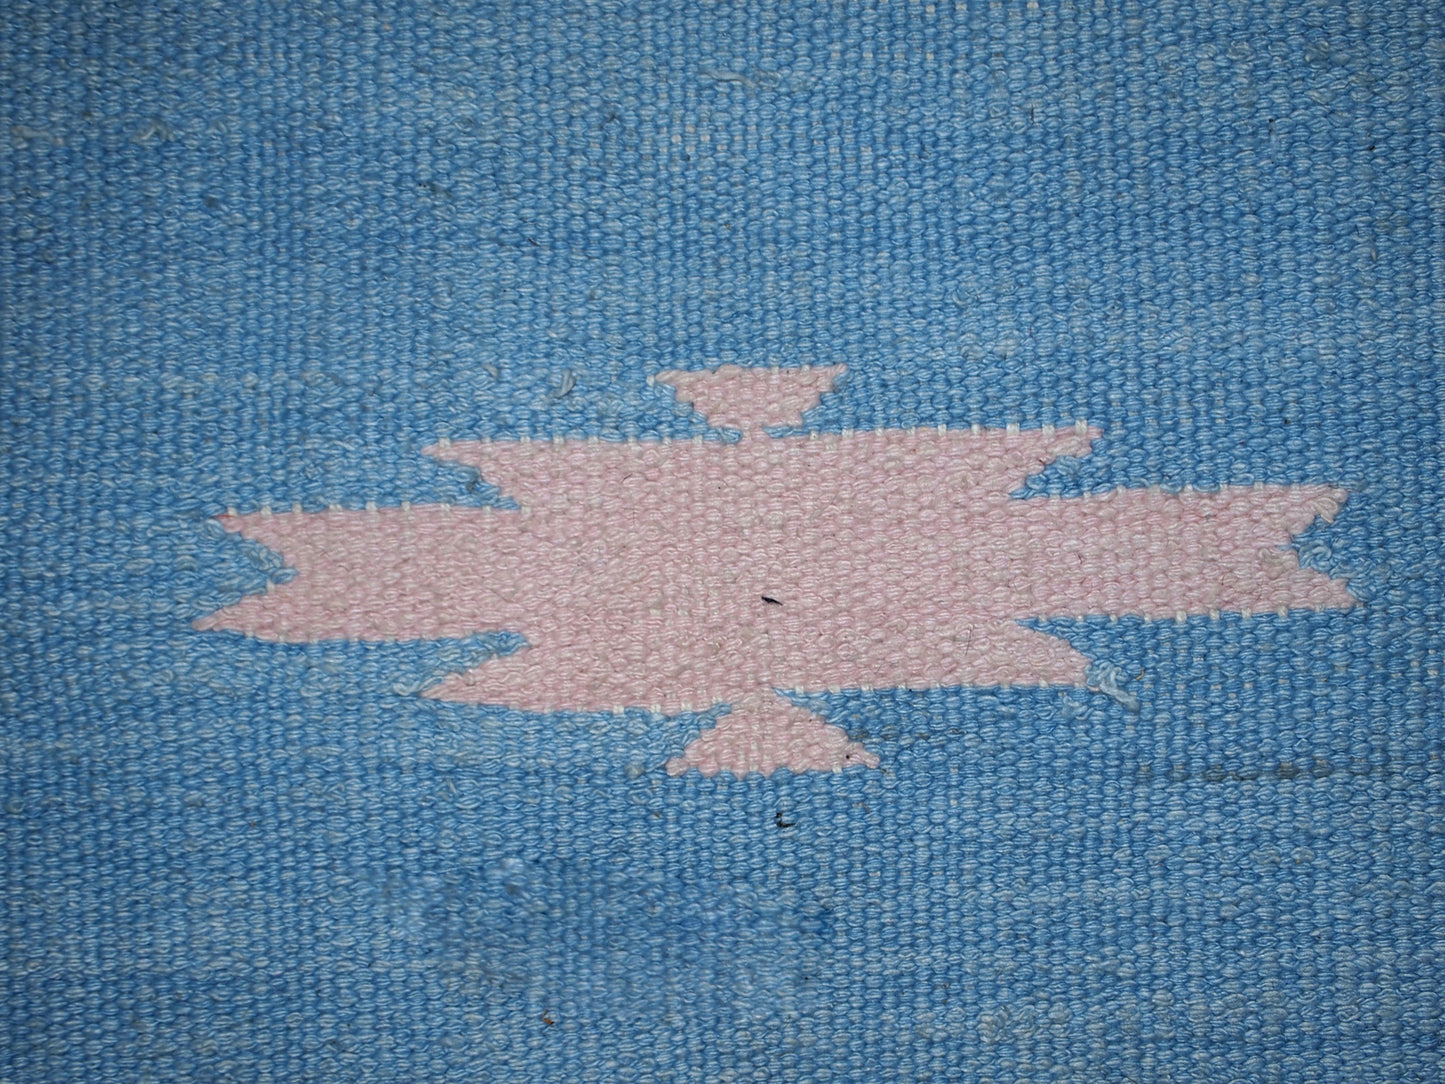 Detail shot of the kilim's tribal design with pink and beige accents.